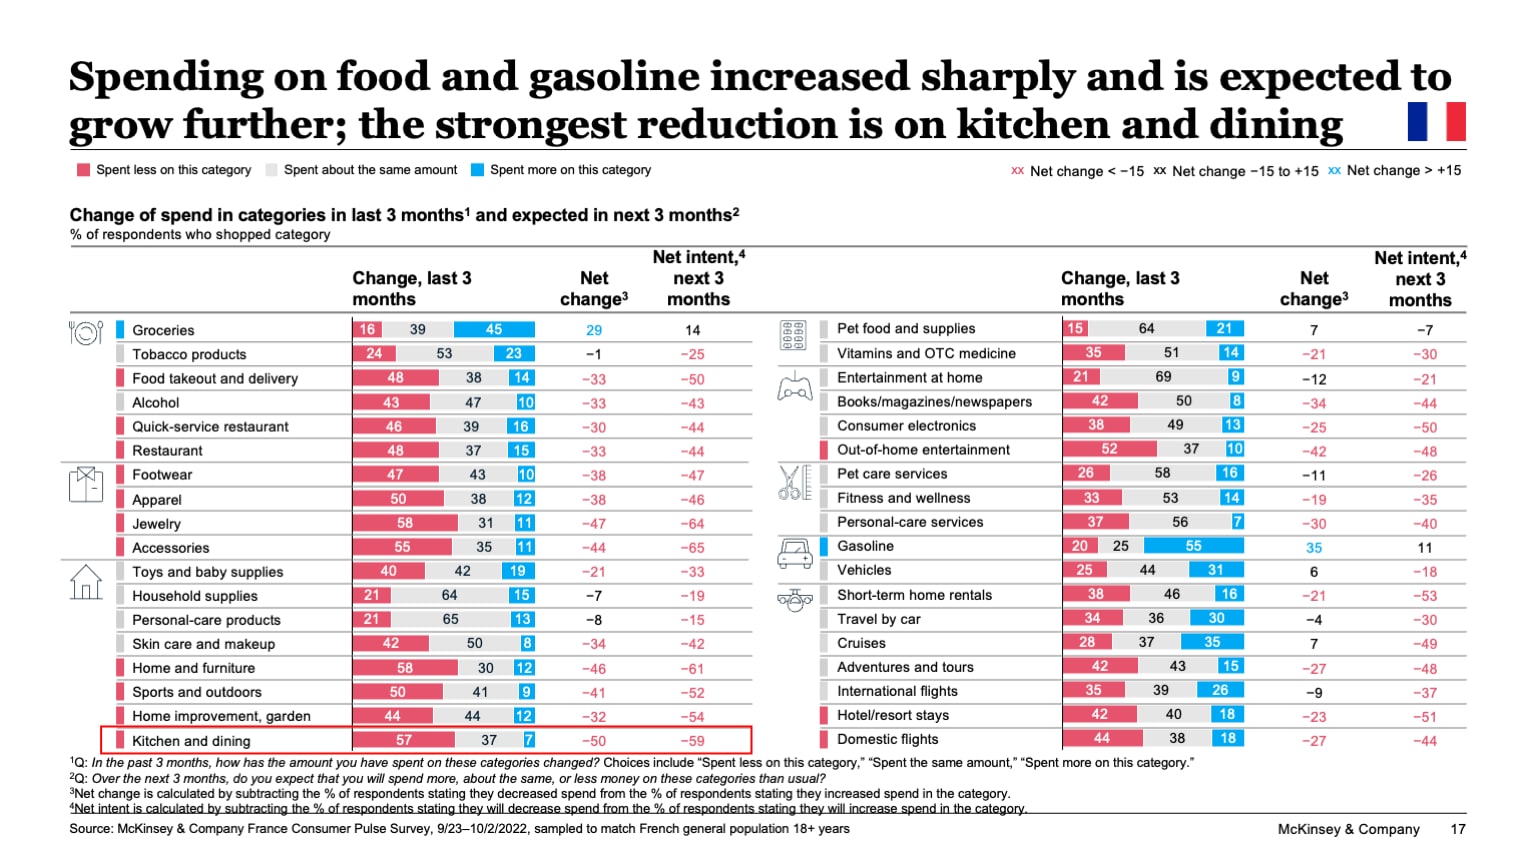 Spending on food and gasoline increased sharply and is expected to grow further; the strongest reduction is on kitchen and dining